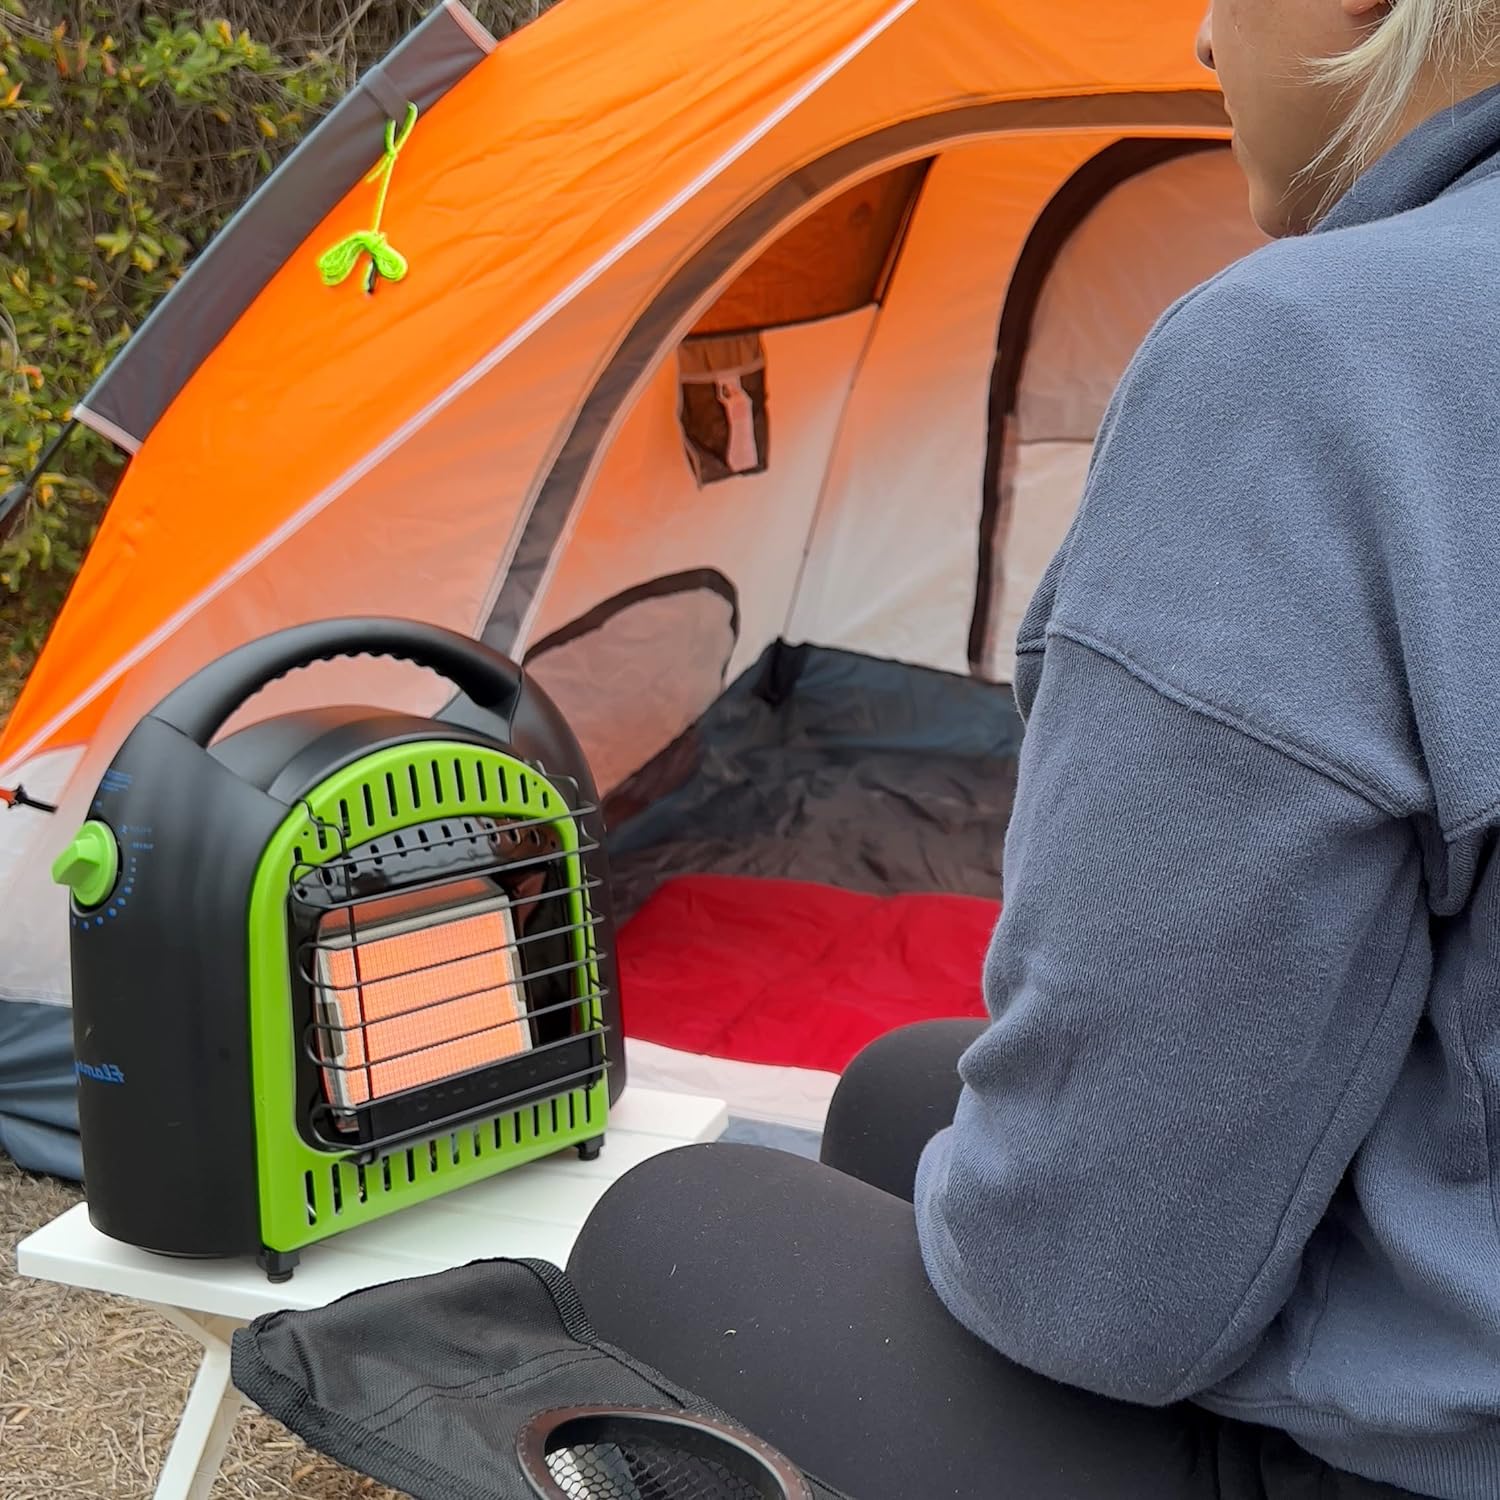 Flame King YSN-CHS10 10,000 BTU Propane Space Radiant Portable Heater Indoor*  Outdoor for Camping, Garage, Ice Fishing, Patio, Green/Black 10K - Flame King Propane Space Radiant Portable Heater Review